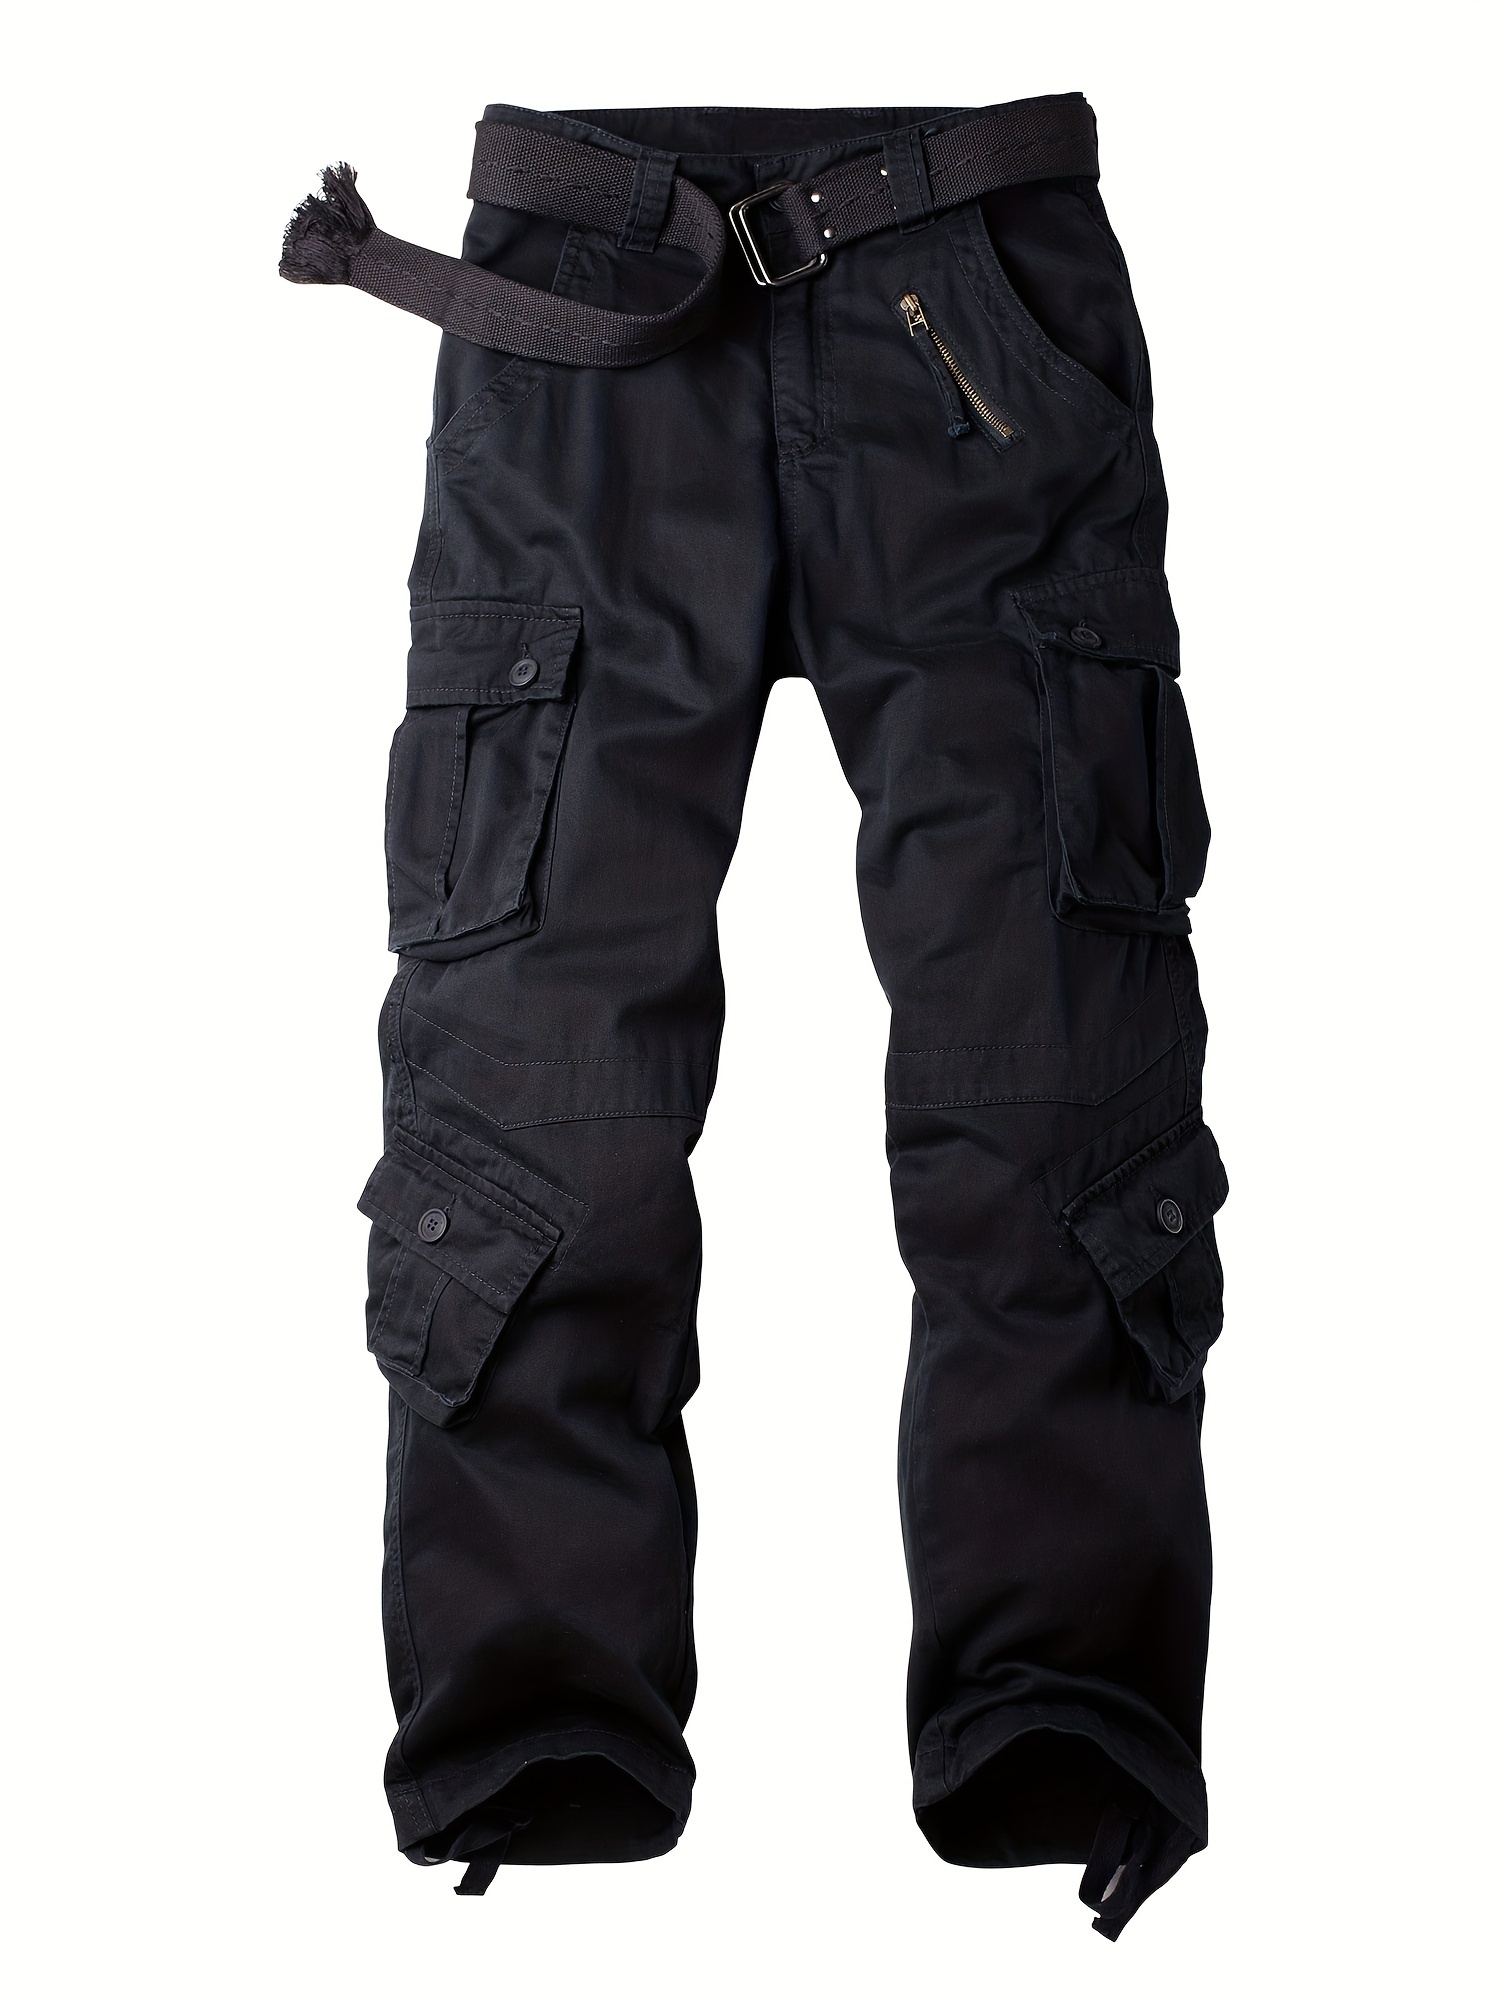 Men Military Pants Army Trousers Many Pockets Pants Men Casual Cargo Casual  Pant